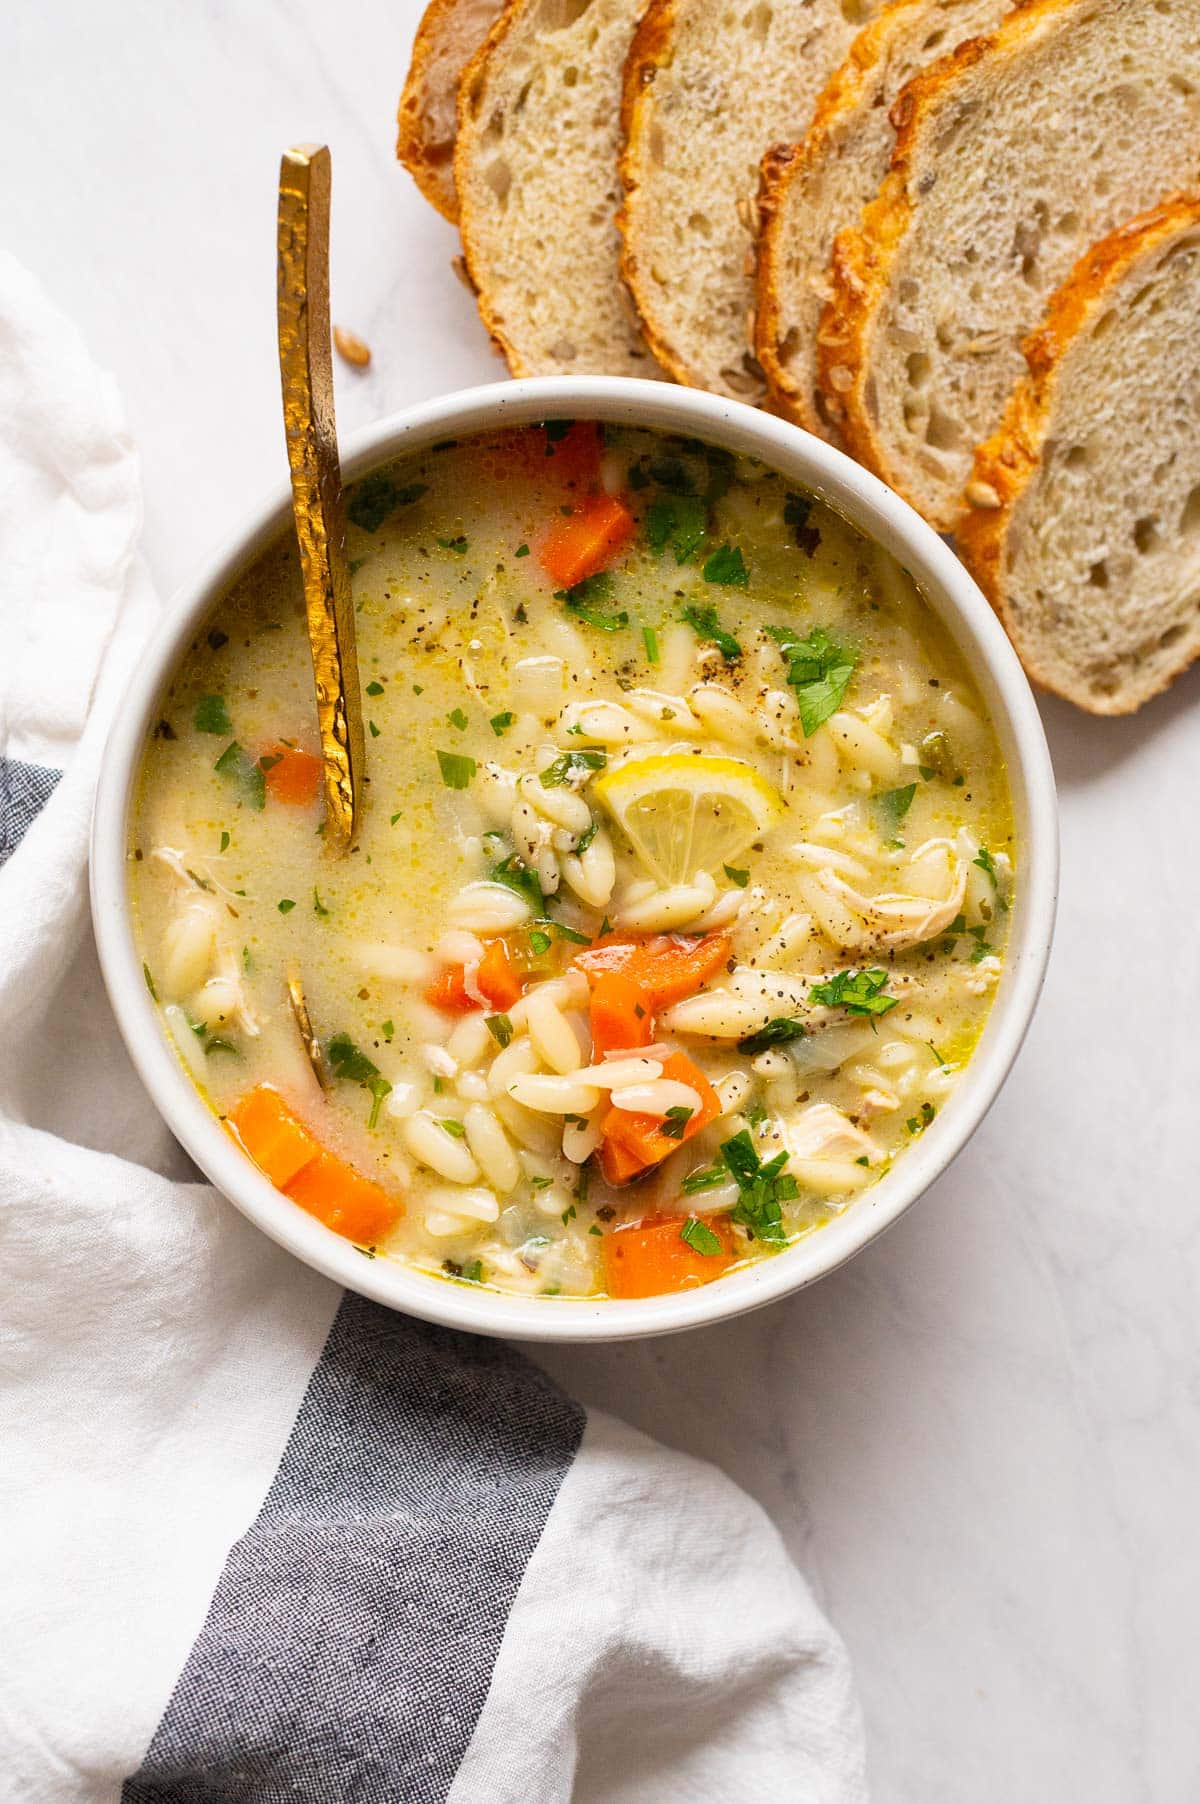 Lemon chicken orzo soup served in a bowl with a golden spoon and bread slices.